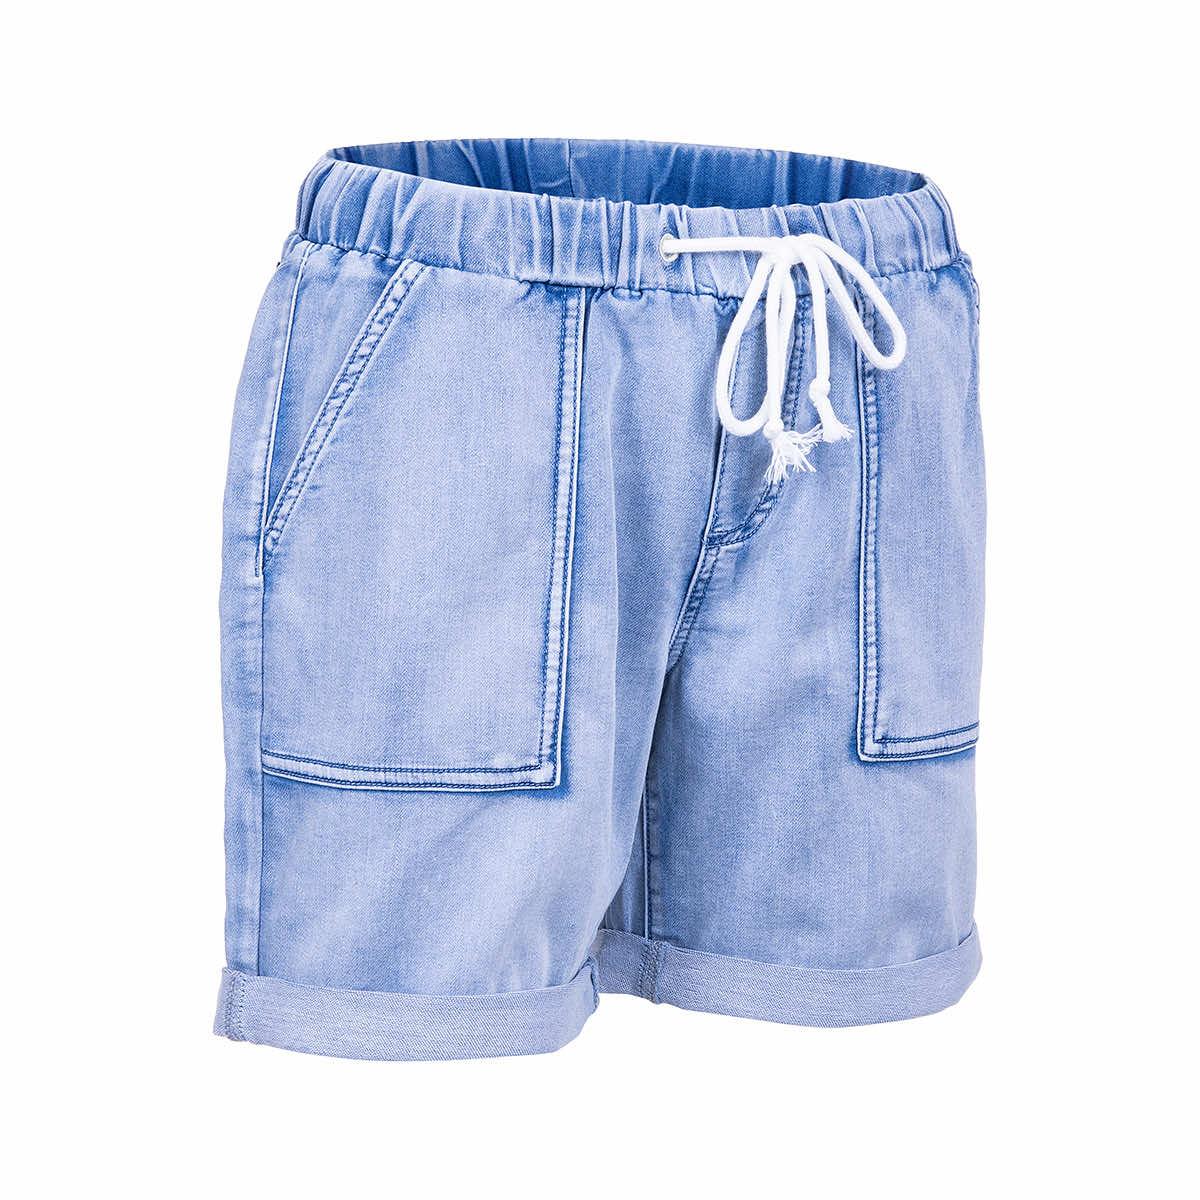  Women's French Terry Roll Cuff Shorts